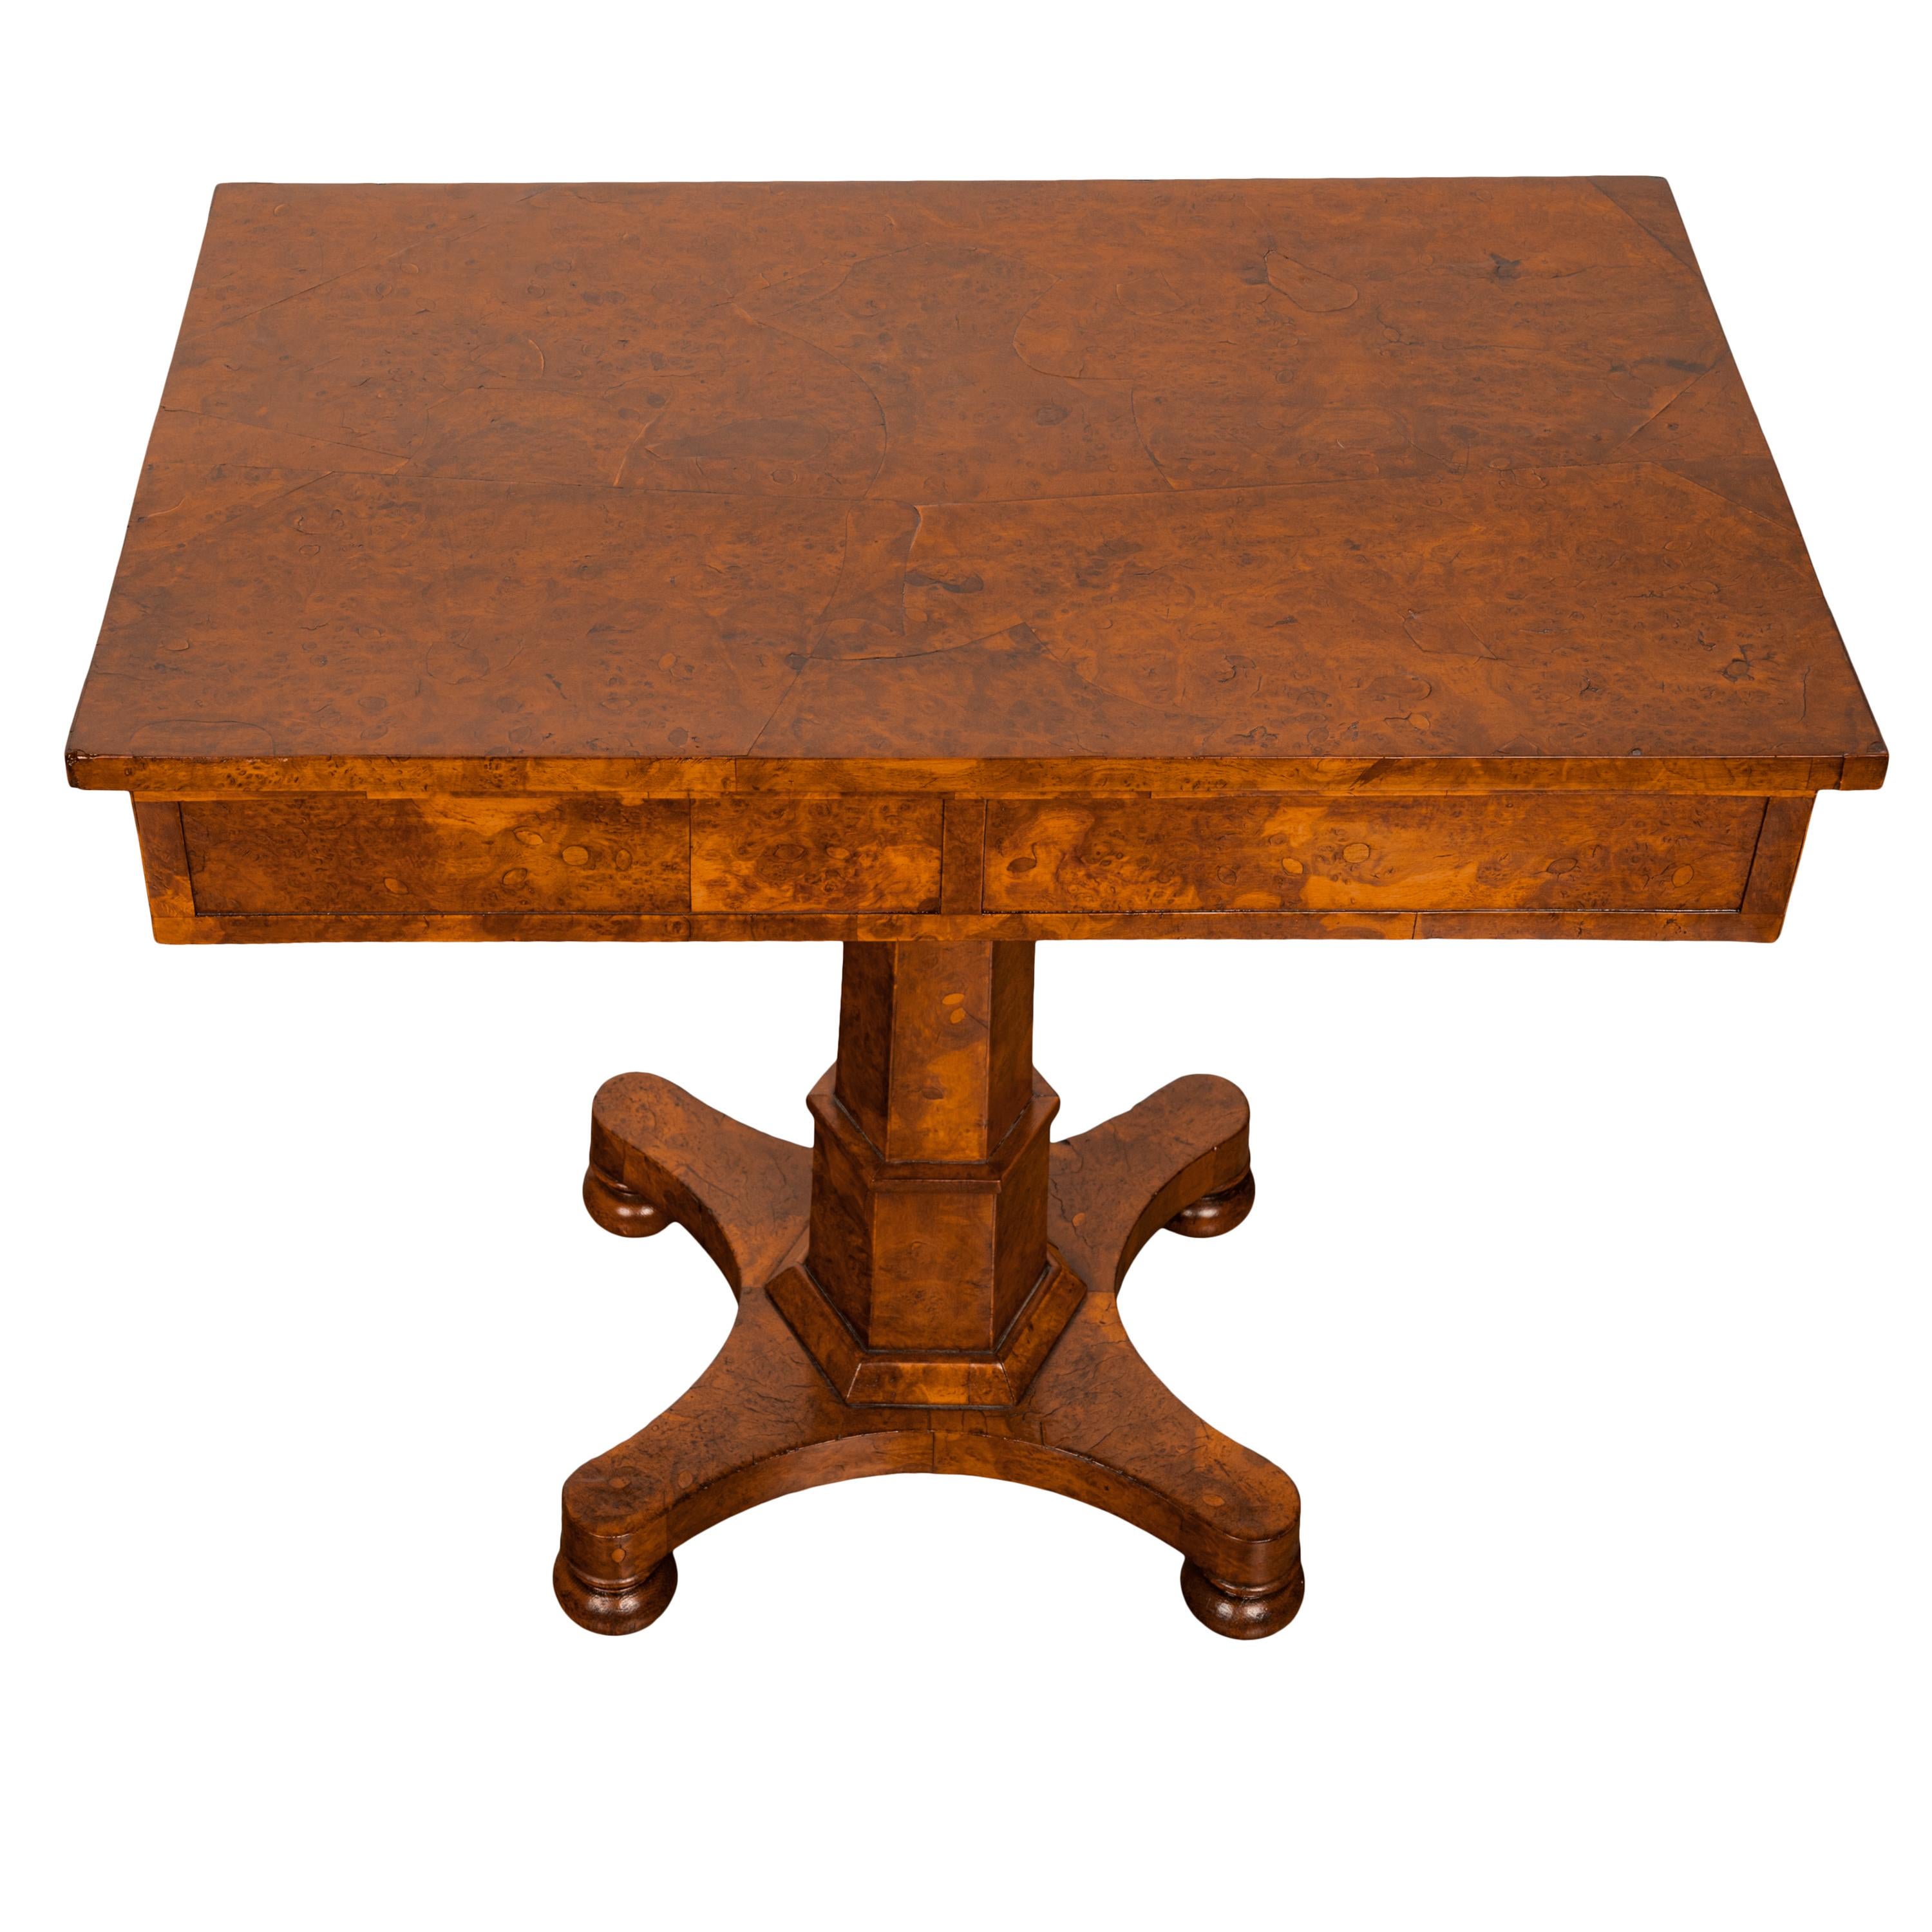 A very rare antique George IV late Regency burl elm pedestal side table, circa 1825.
The table made from the most incredible burl elm throughout, the highly figured grain rectangular table top with a drawer at each end and both drawers having a pair